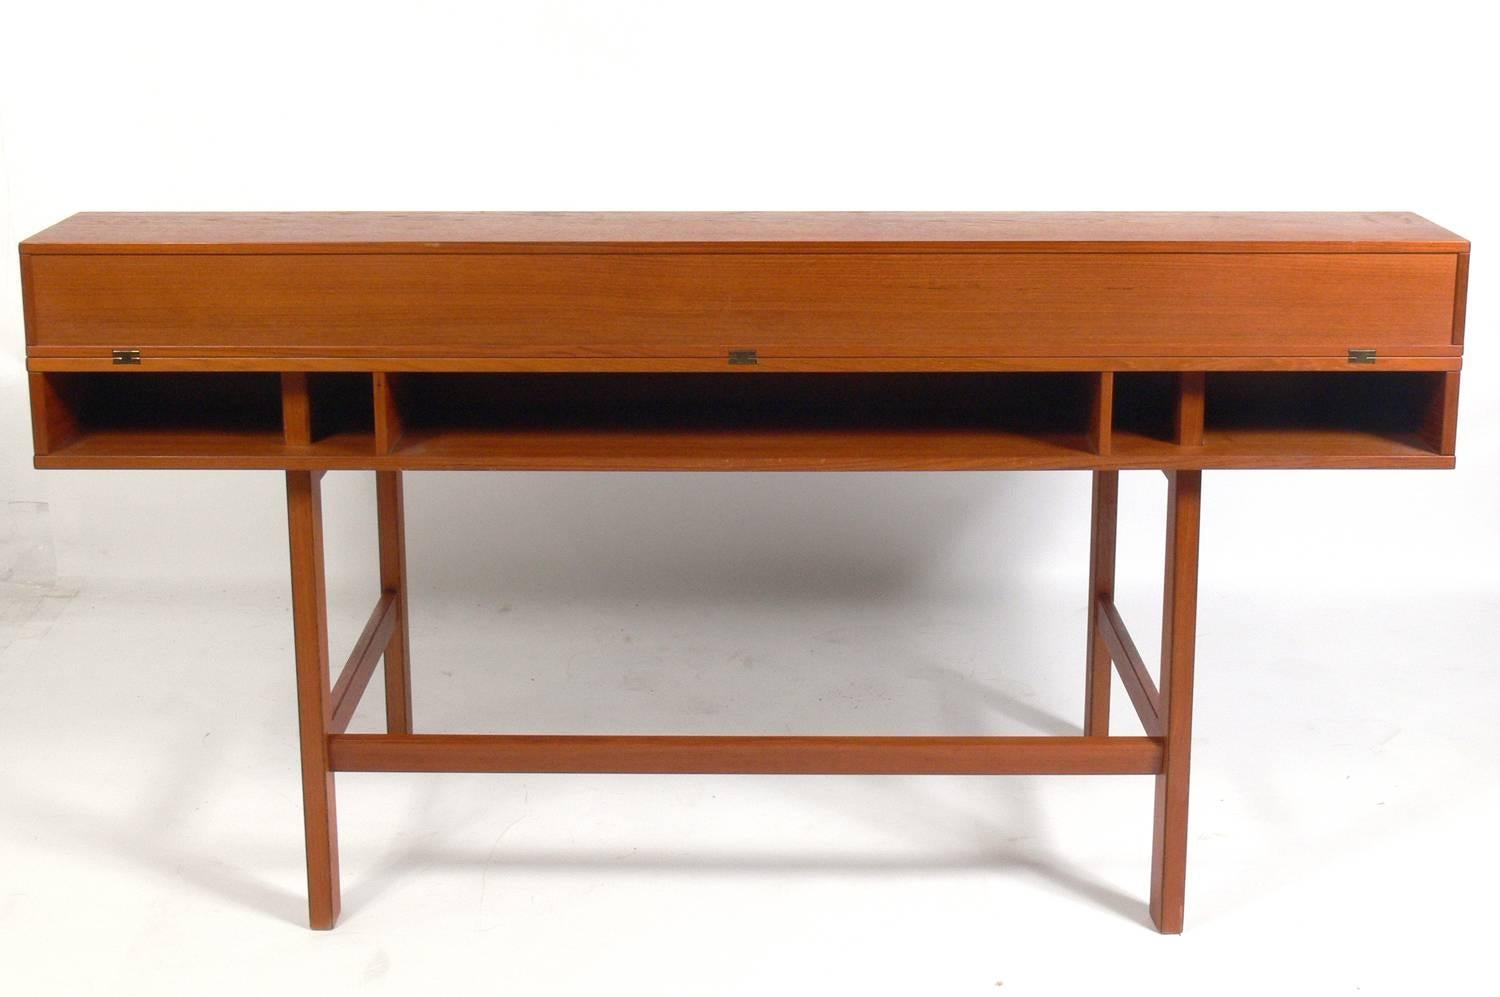 Mid-20th Century Clean Lined Architectural Danish Modern Desk by Jens Quistgaard